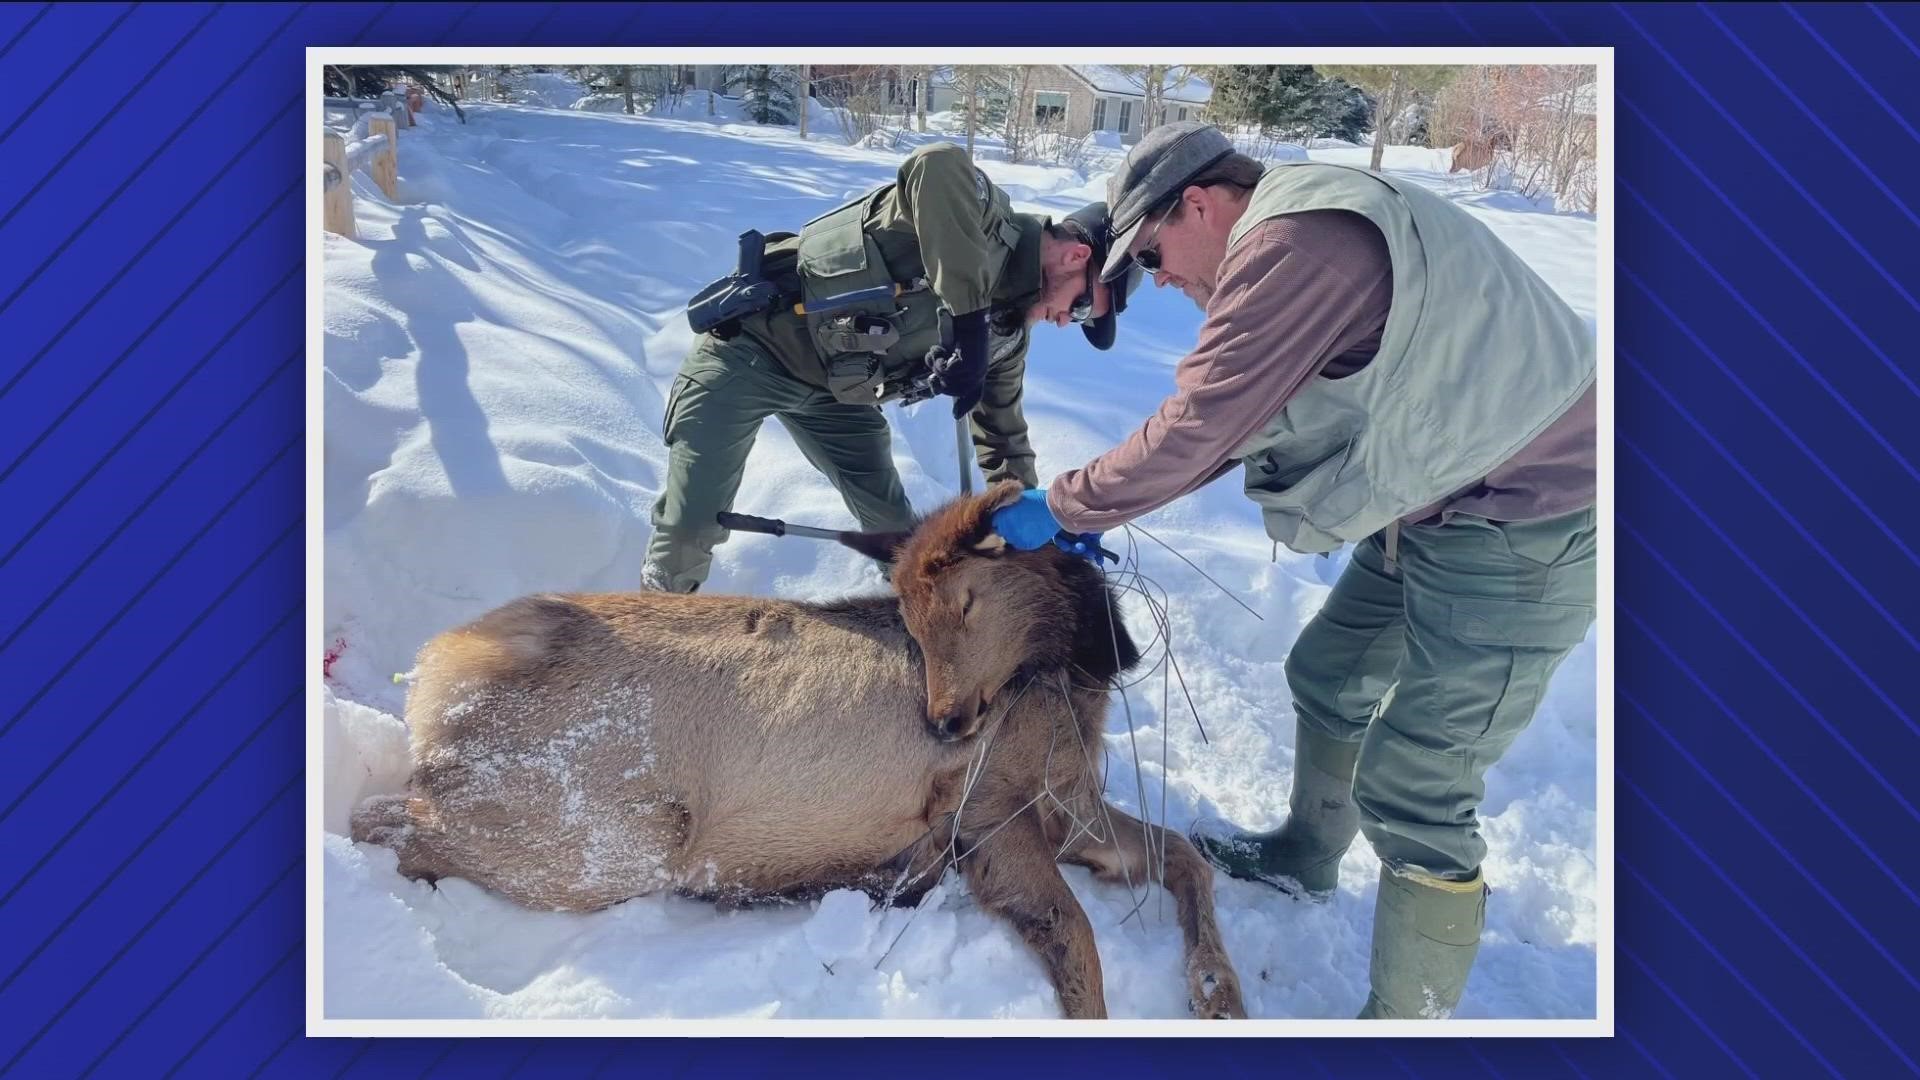 Idaho Fish and Game has received four reports in the last week of elk entangled in items from residential yards across the Wood River Valley.